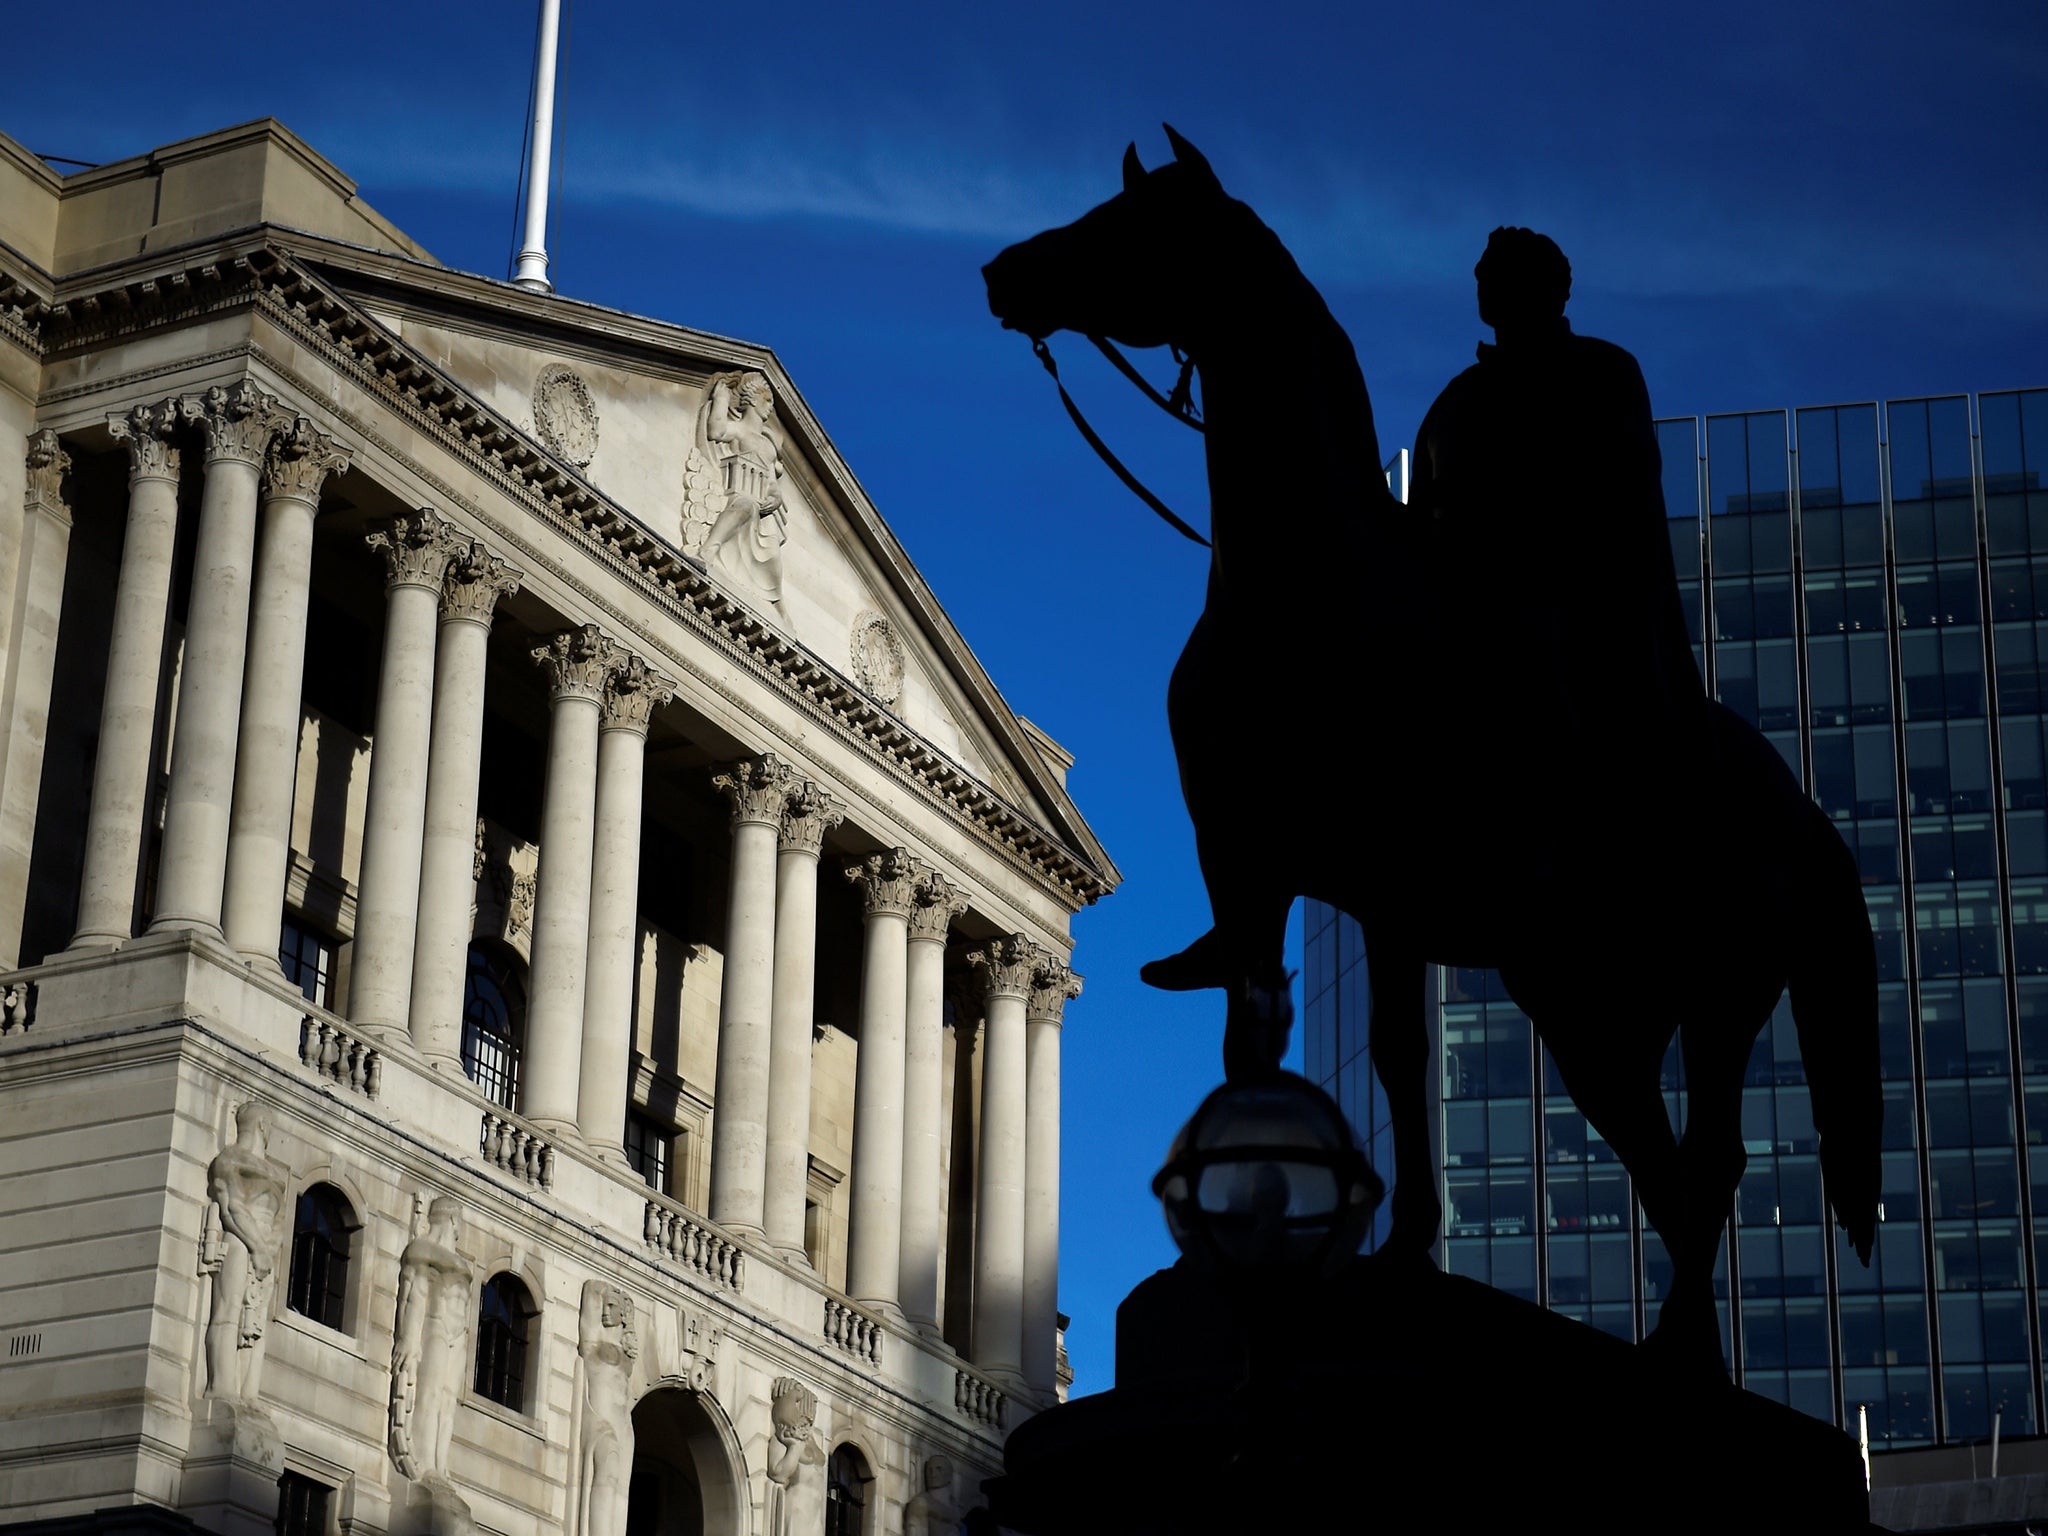 The Bank of England decision about interest rates on Thursday is crucial